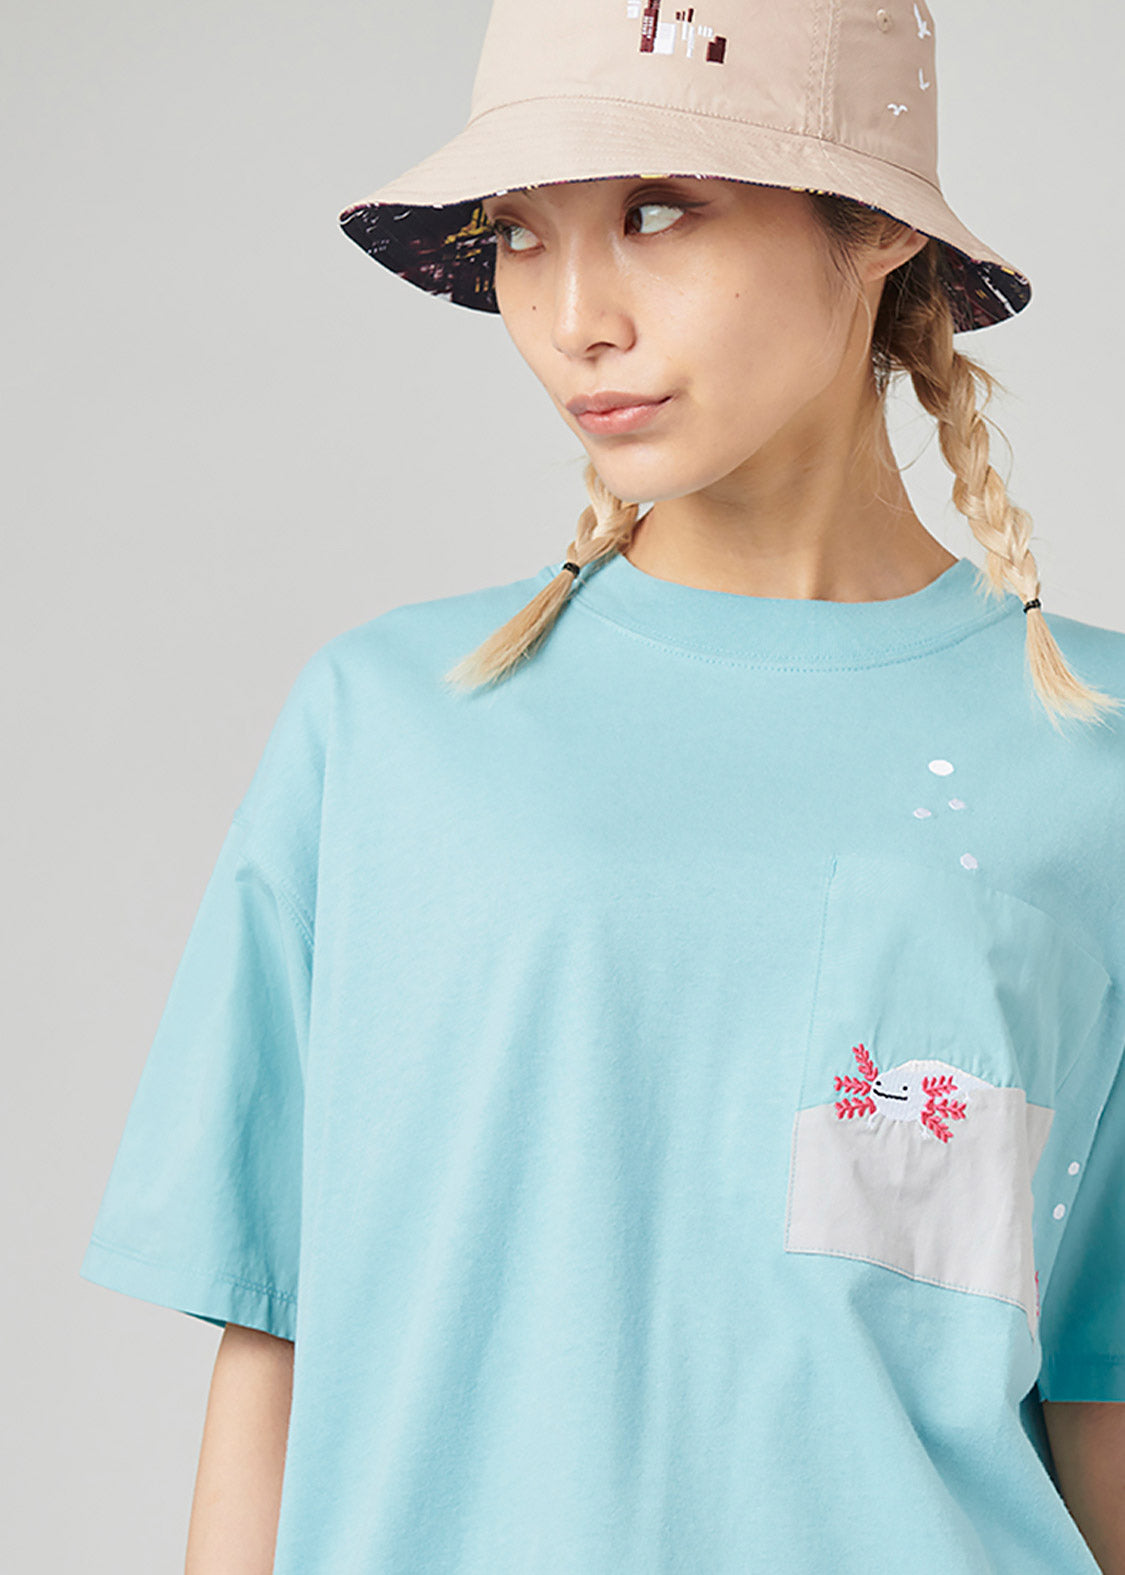 Fabric combination Big Silhouette Short Sleeve Tee (Smiling Wooper)